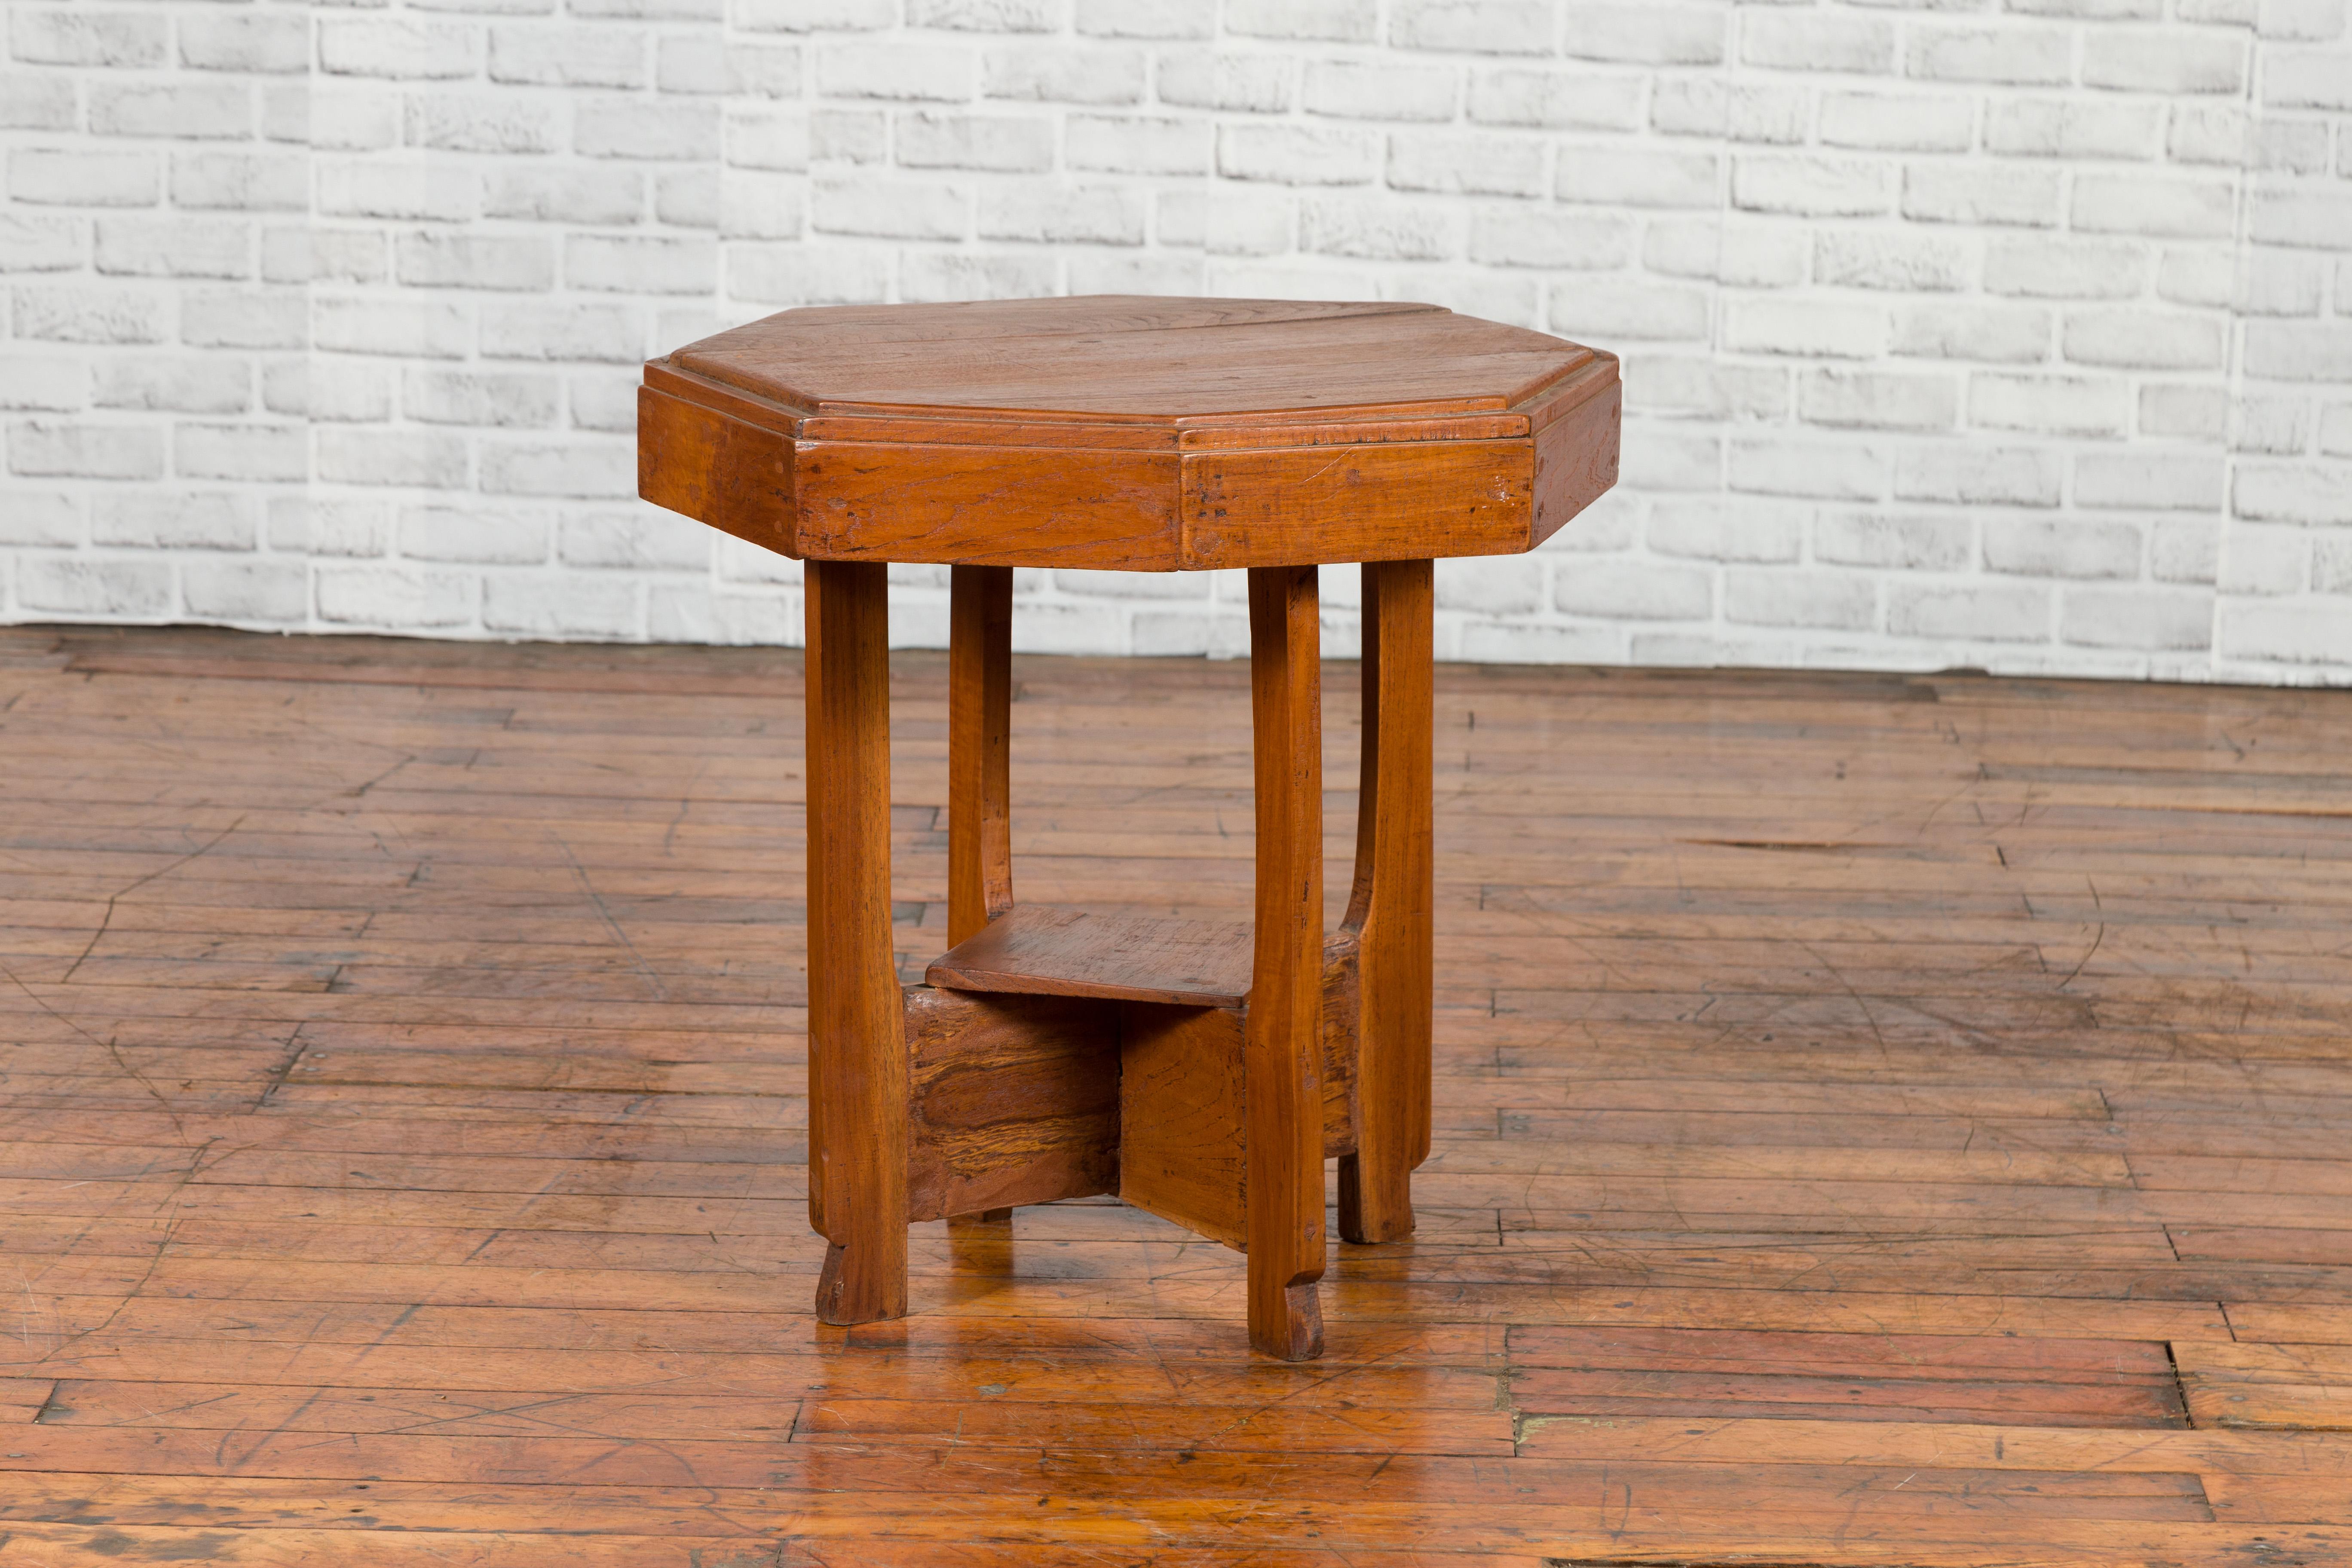 20th Century Javanese Teak Art Deco Style Vintage Table with Octagonal Top and Lower Shelf